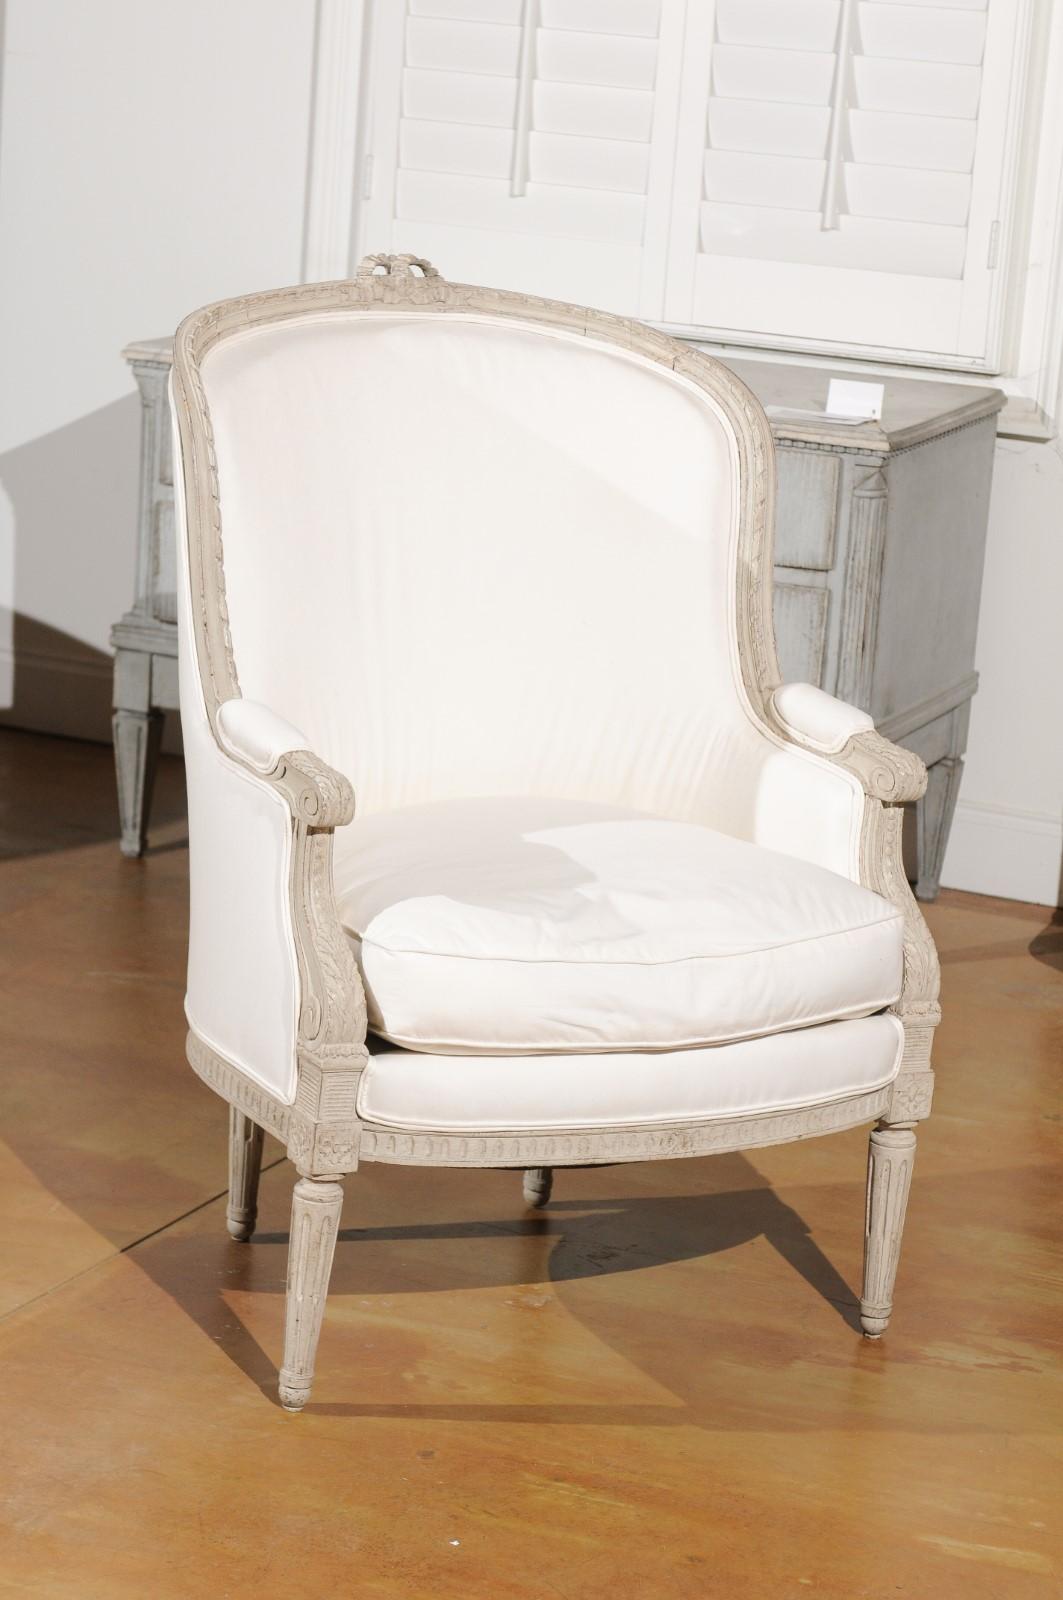 A Swedish neoclassical style painted wood barrel back bergère chair from the early 20th century, with carved bow, fluted legs and new upholstery. Born in Sweden during the early years of the 20th century, this exquisite barrel back chair presents